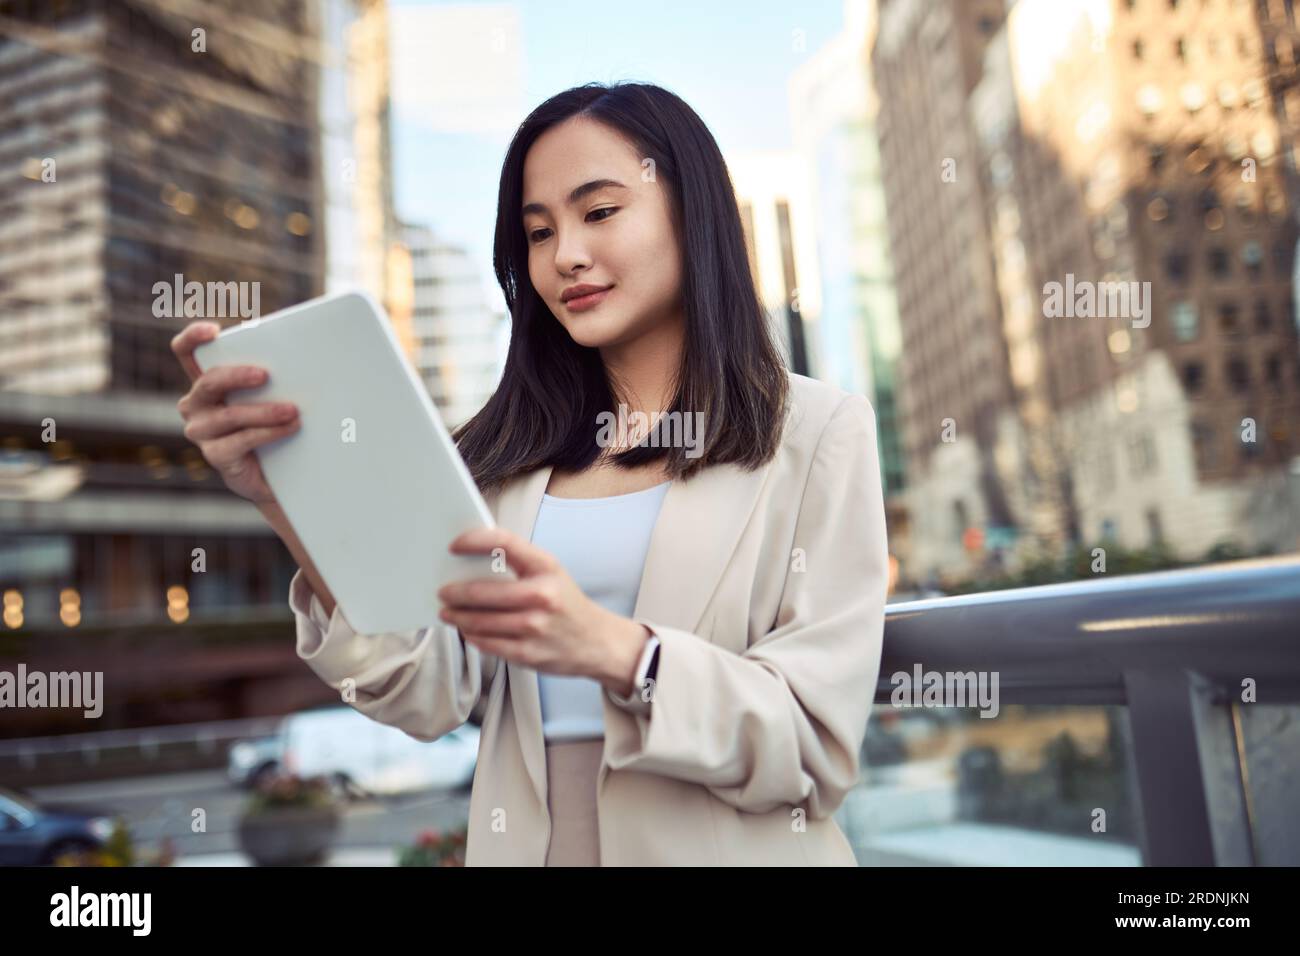 Young Asian business woman professional standing in city using tablet. Stock Photo